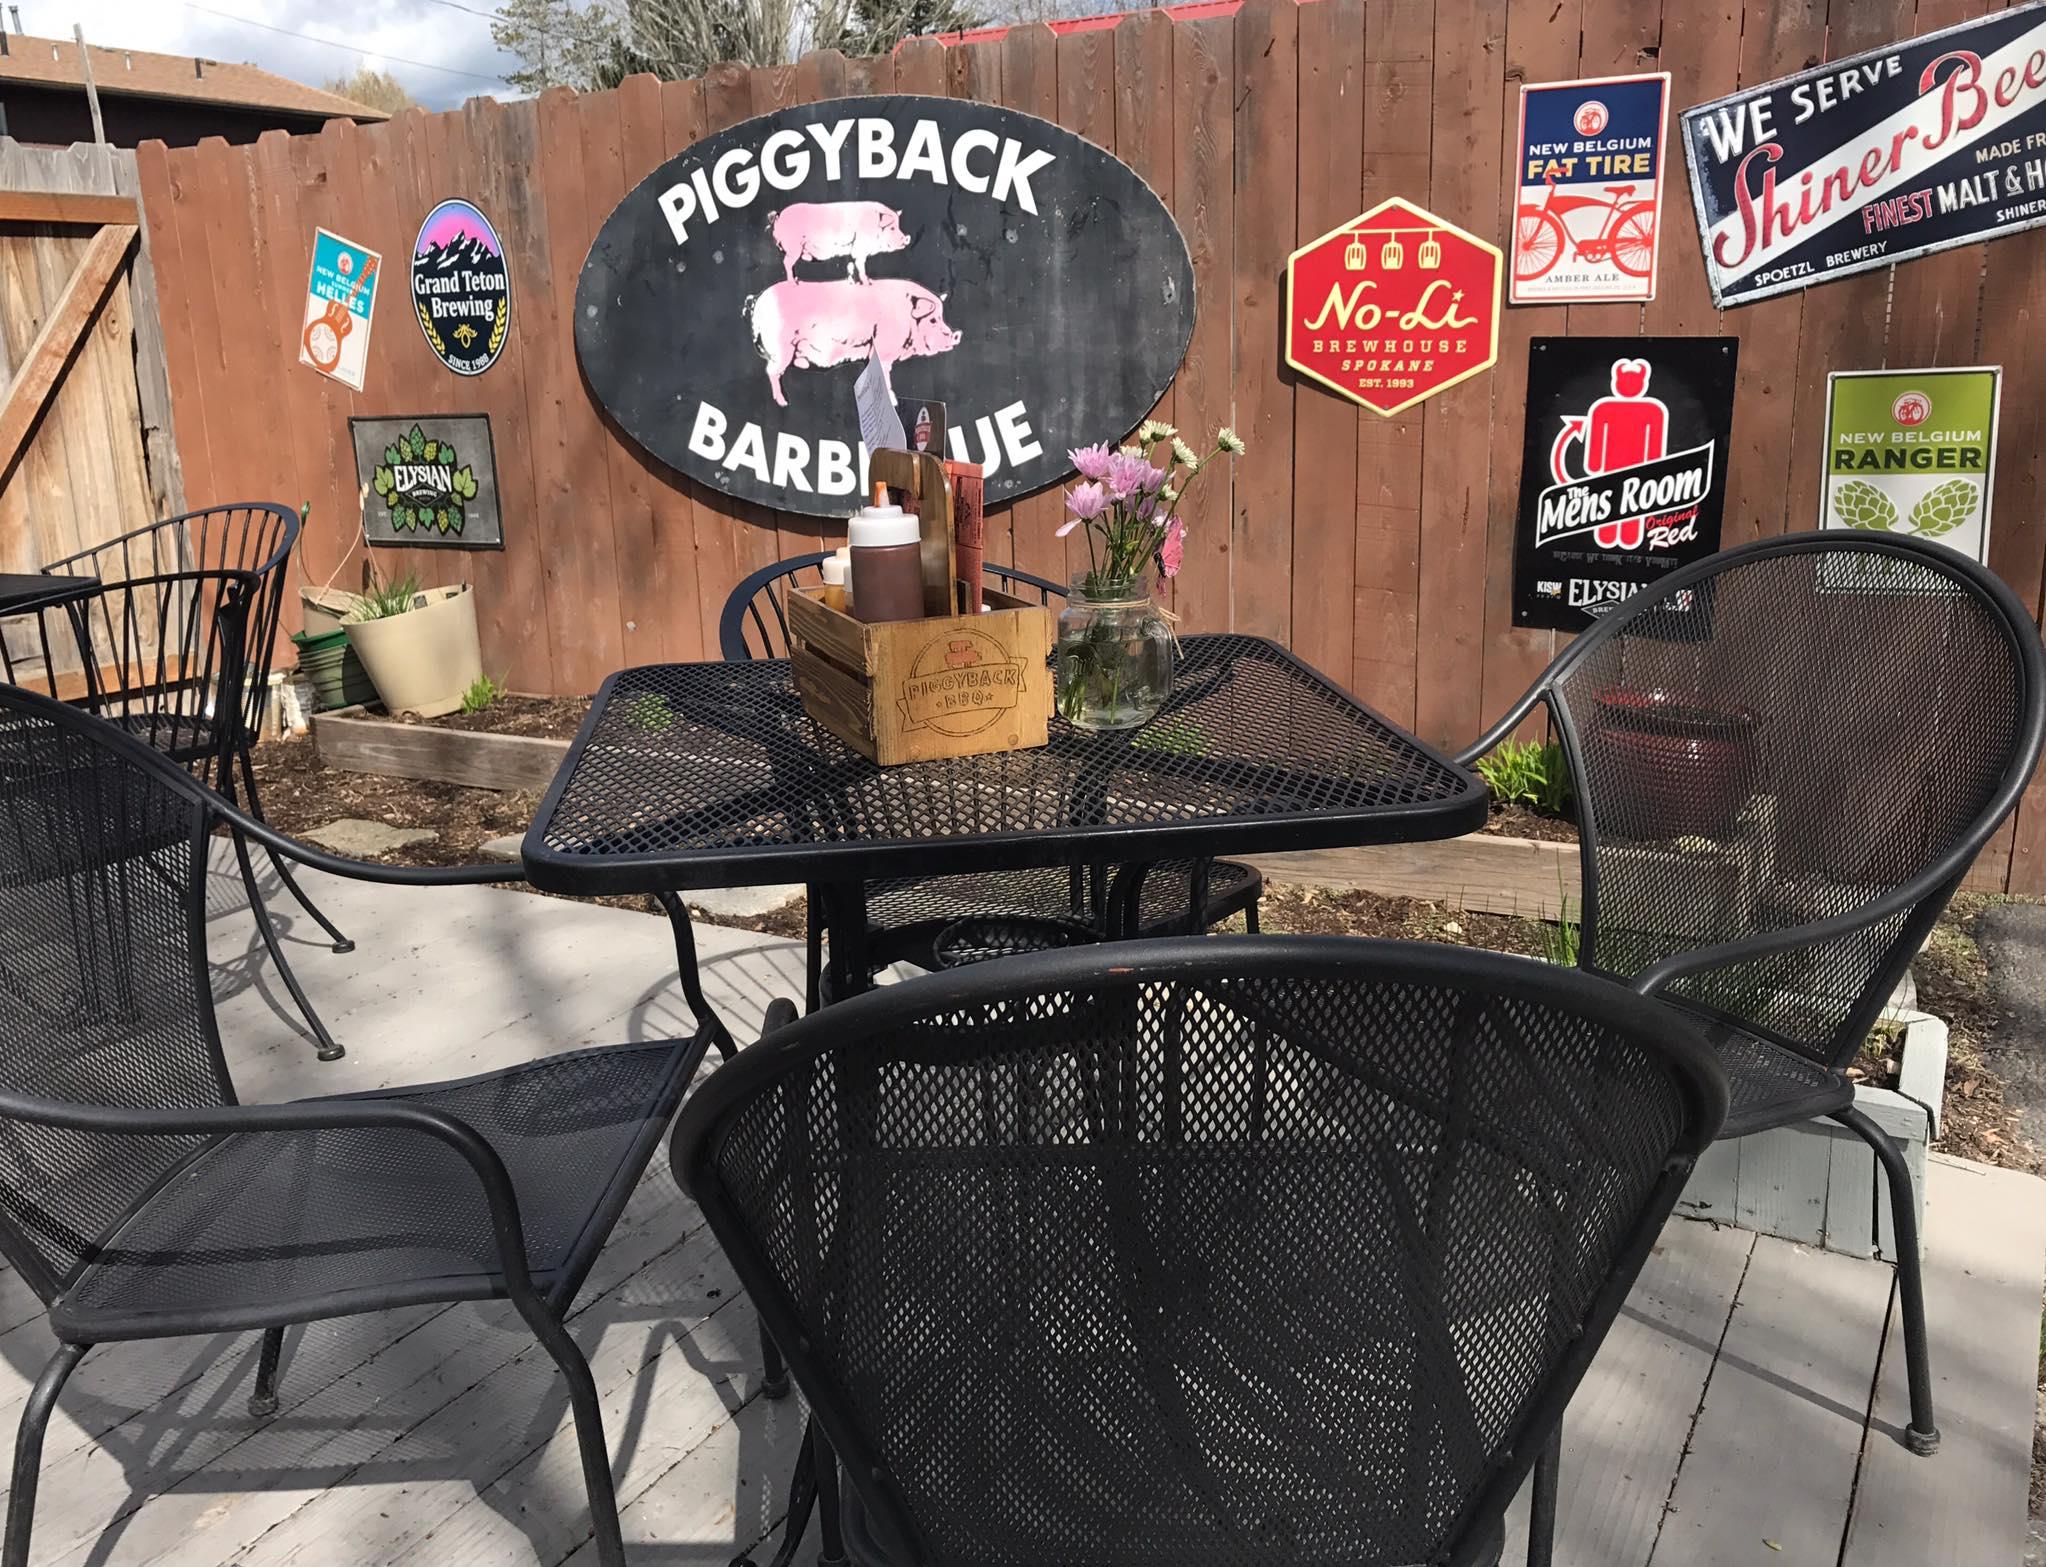 Our outdoor seating area is a great place to relax and listen to live music.